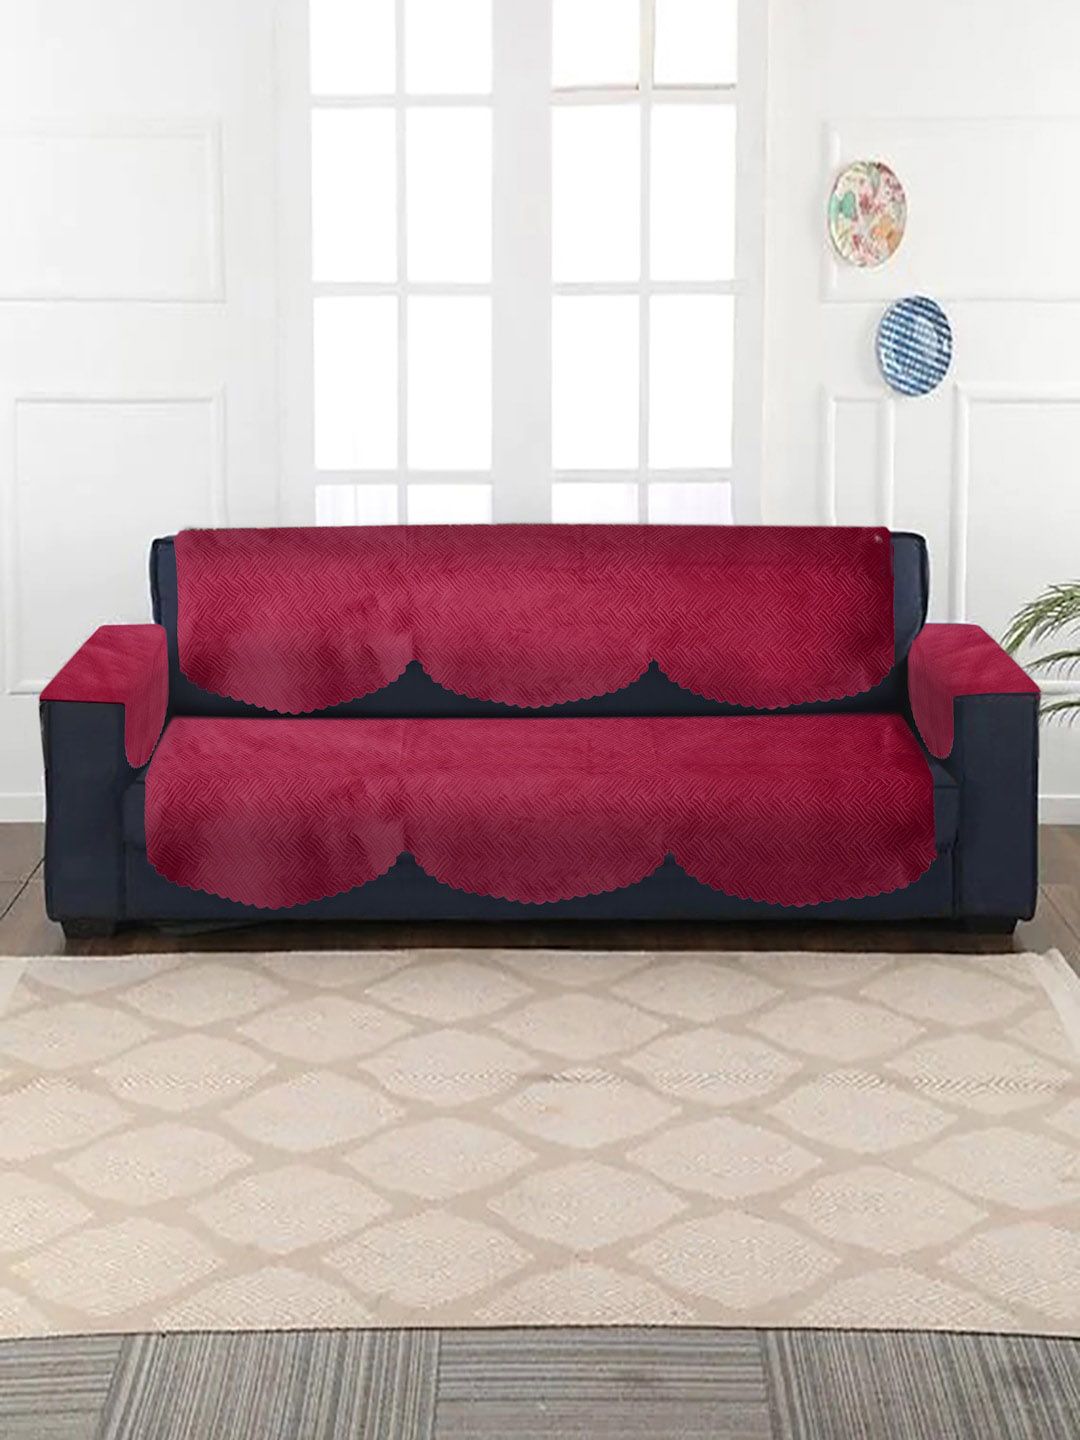 HOSTA HOMES 4 Pieces Maroon Solid Velvet 3 Seater Sofa Cover Price in India